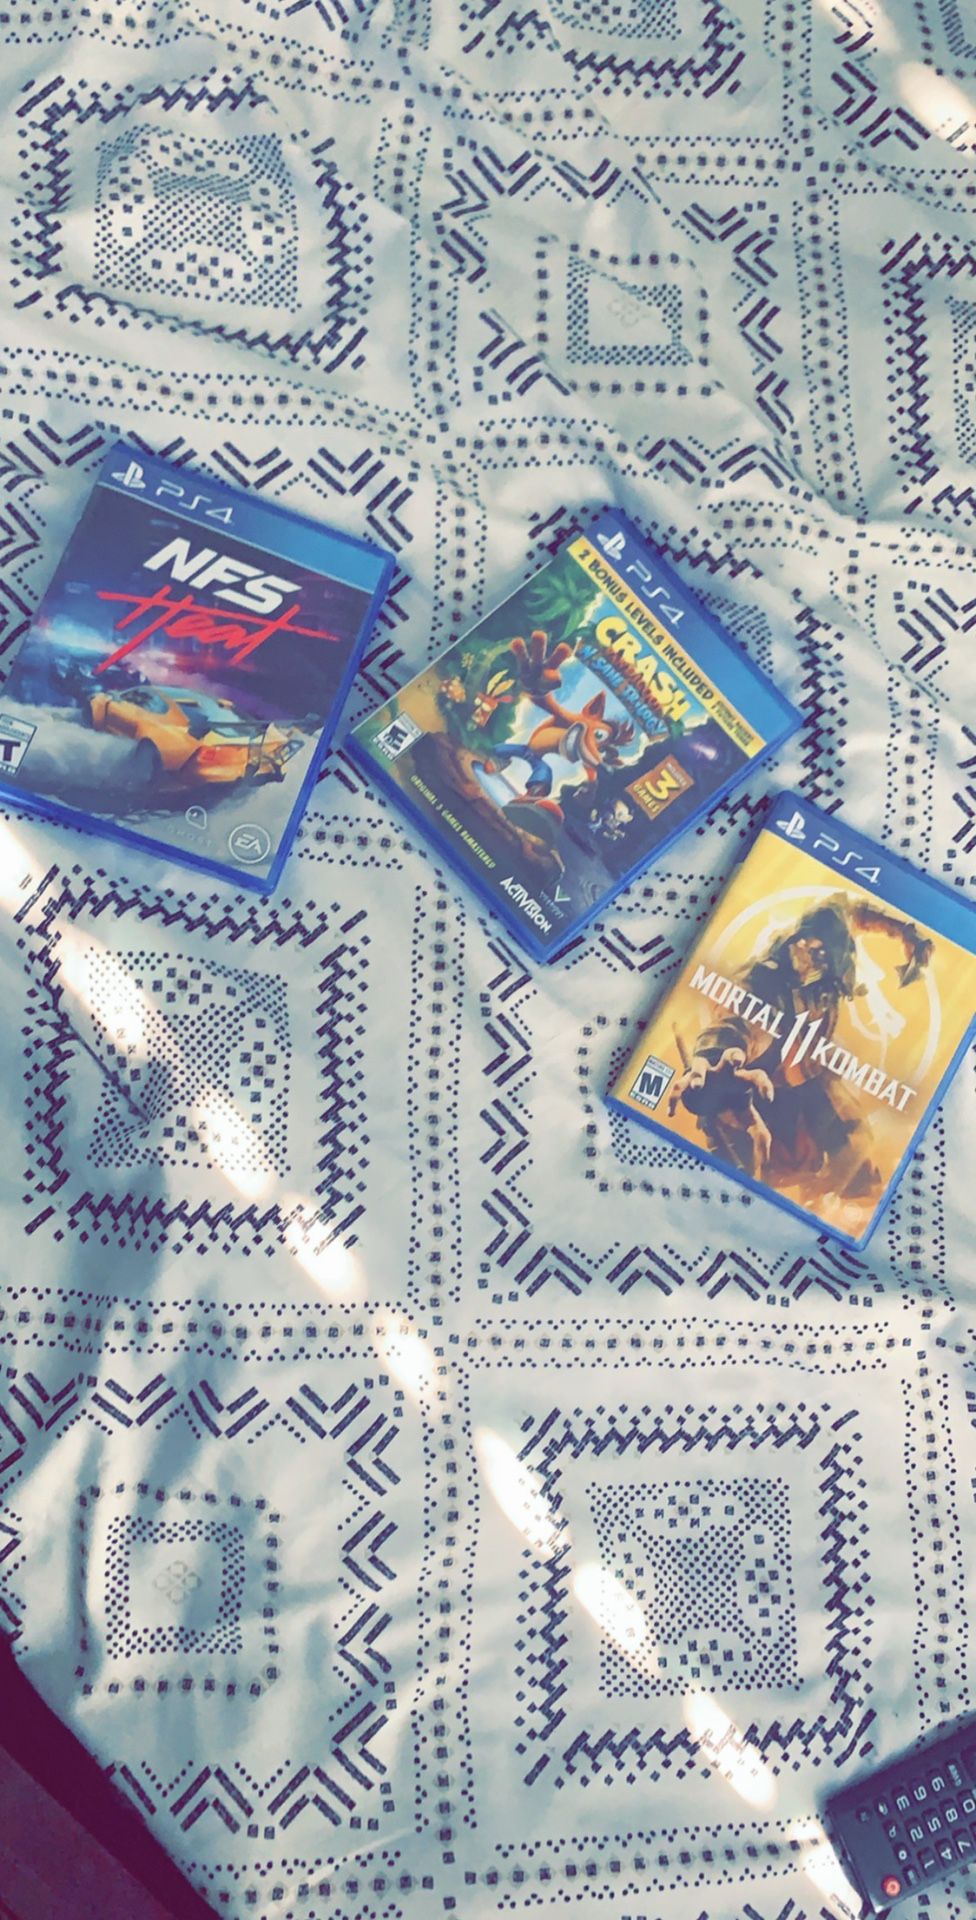 PS4 games for trade